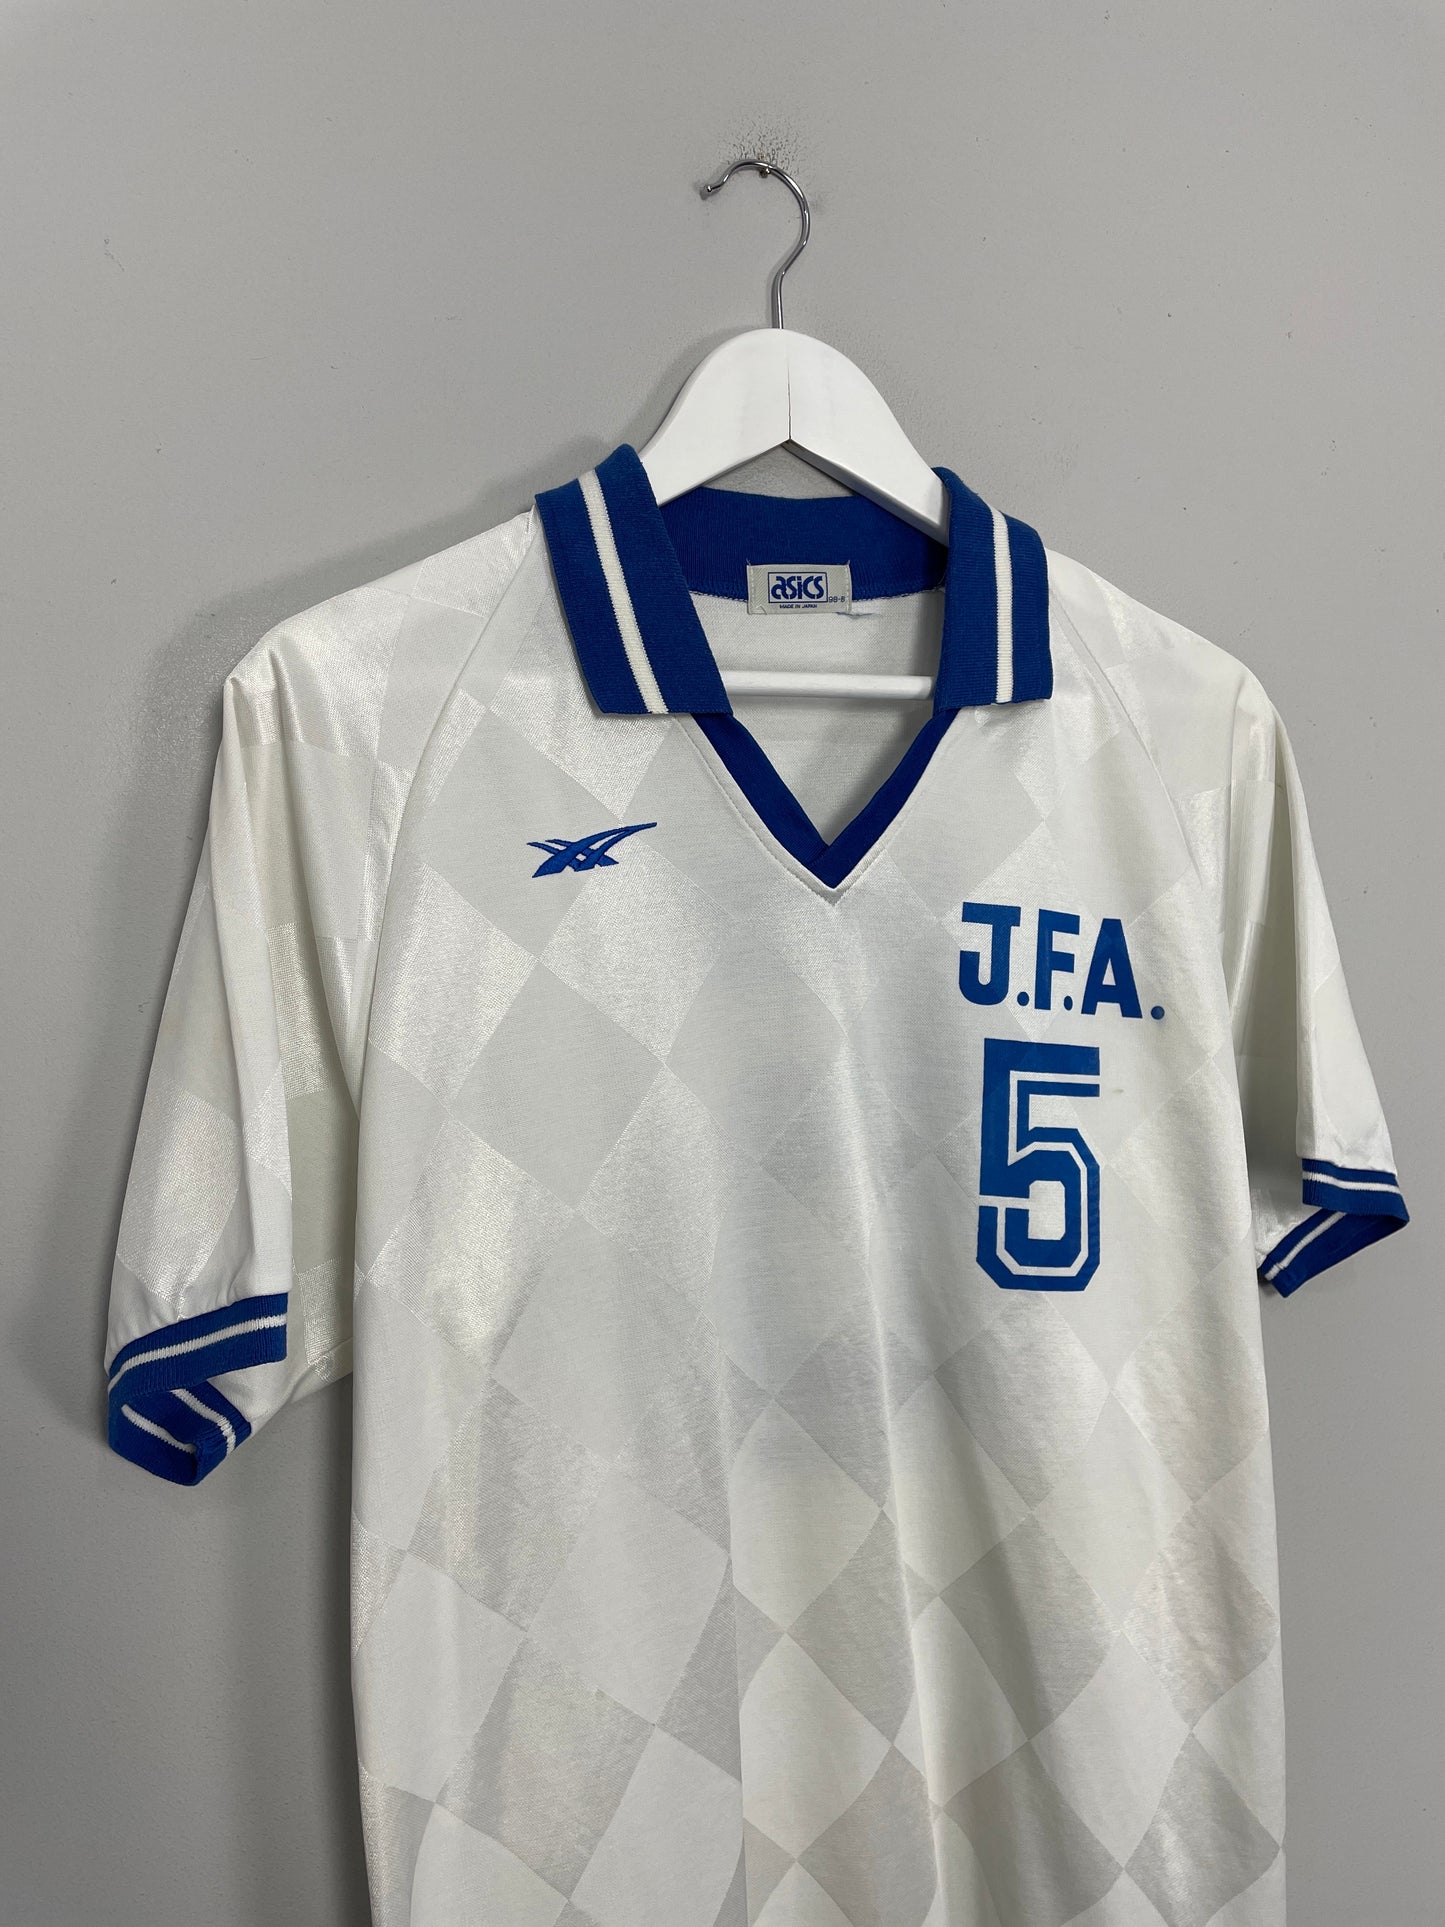 1987/88 JAPAN #5 *OLYMPIC QUALIFIER - PLAYER ISSUE* AWAY SHIRT (M) ASICS